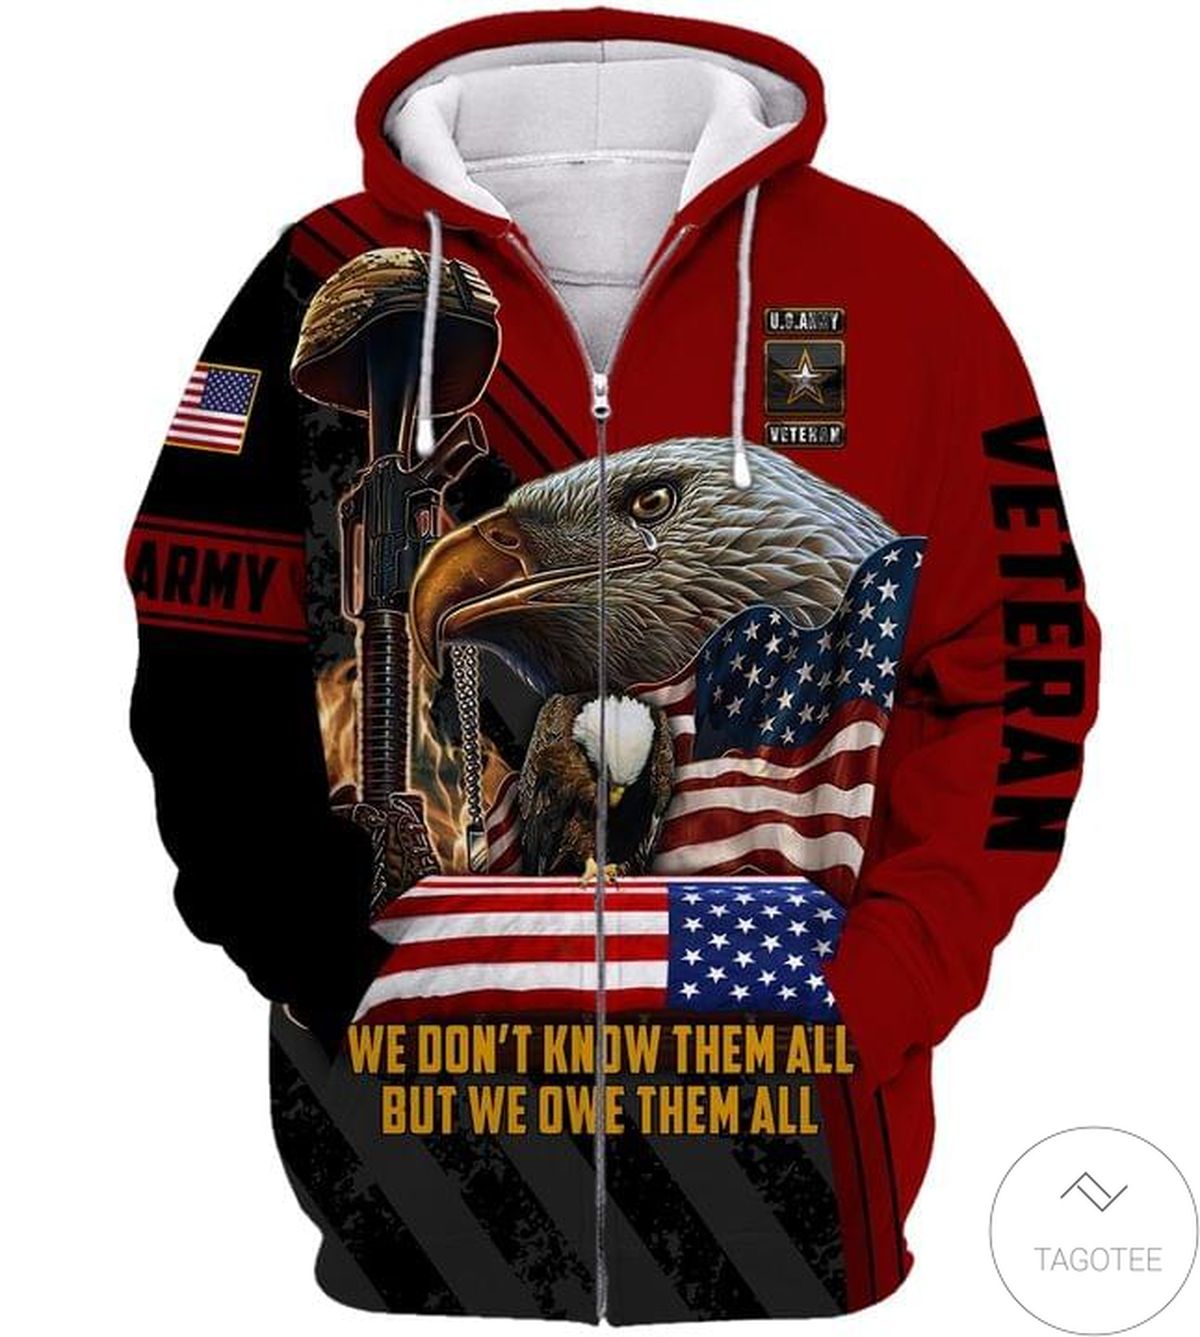 We Don't Know Them All But We Owe Them All Veteran Zip Hoodie